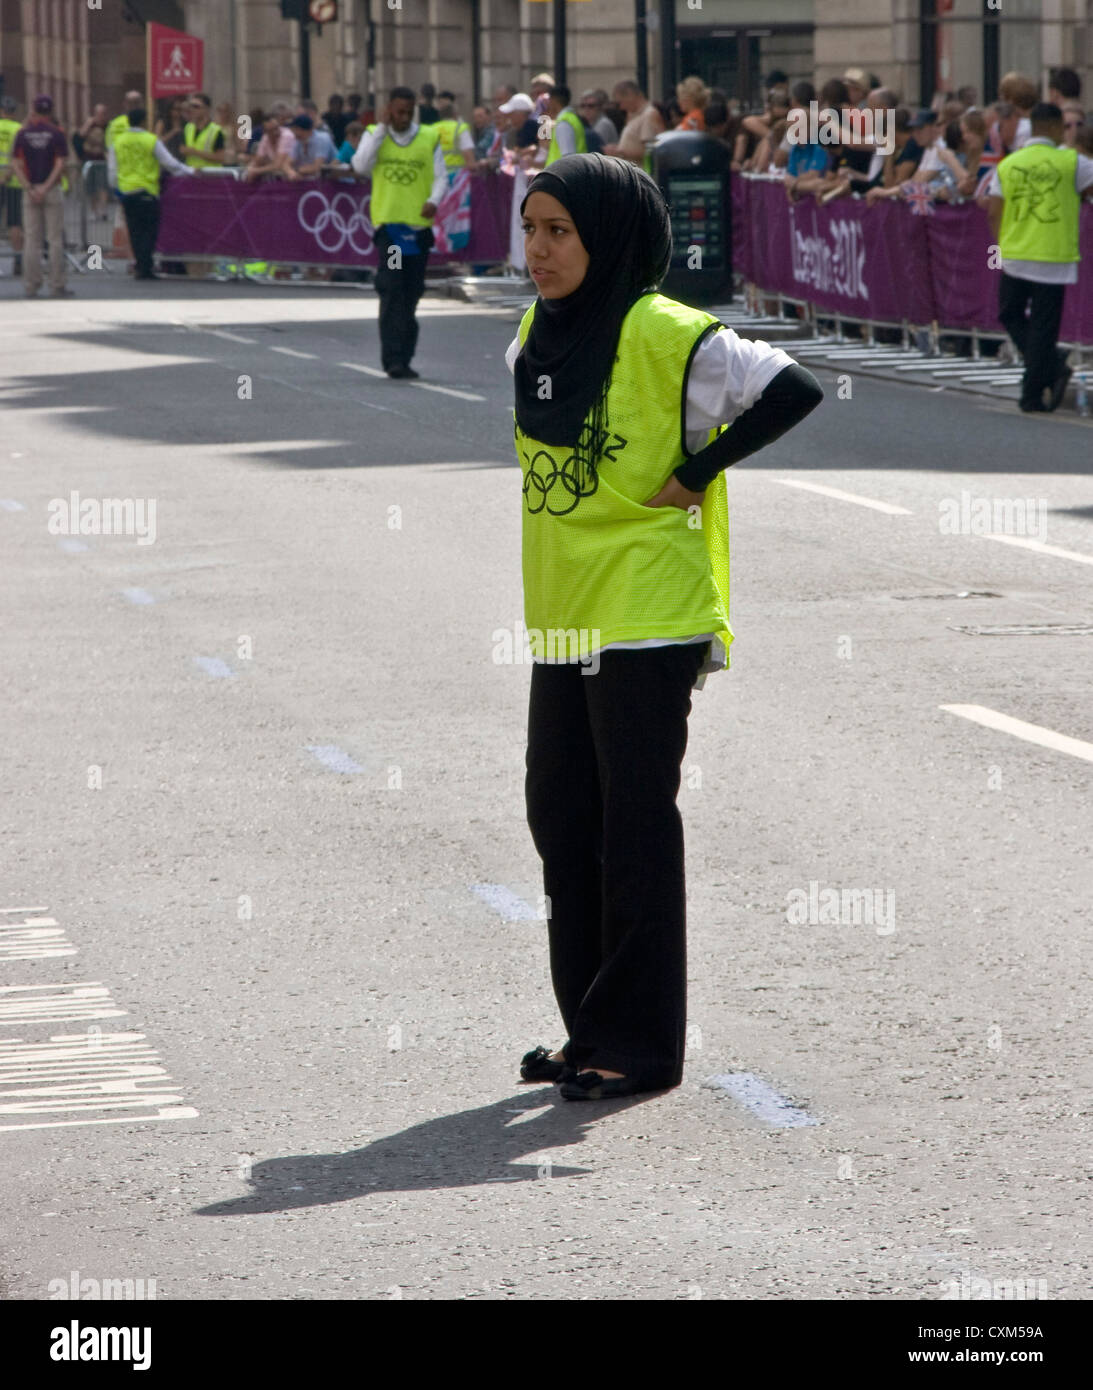 A young Muslim woman marshal at the London 2012 Olympic marathon England Europe Stock Photo